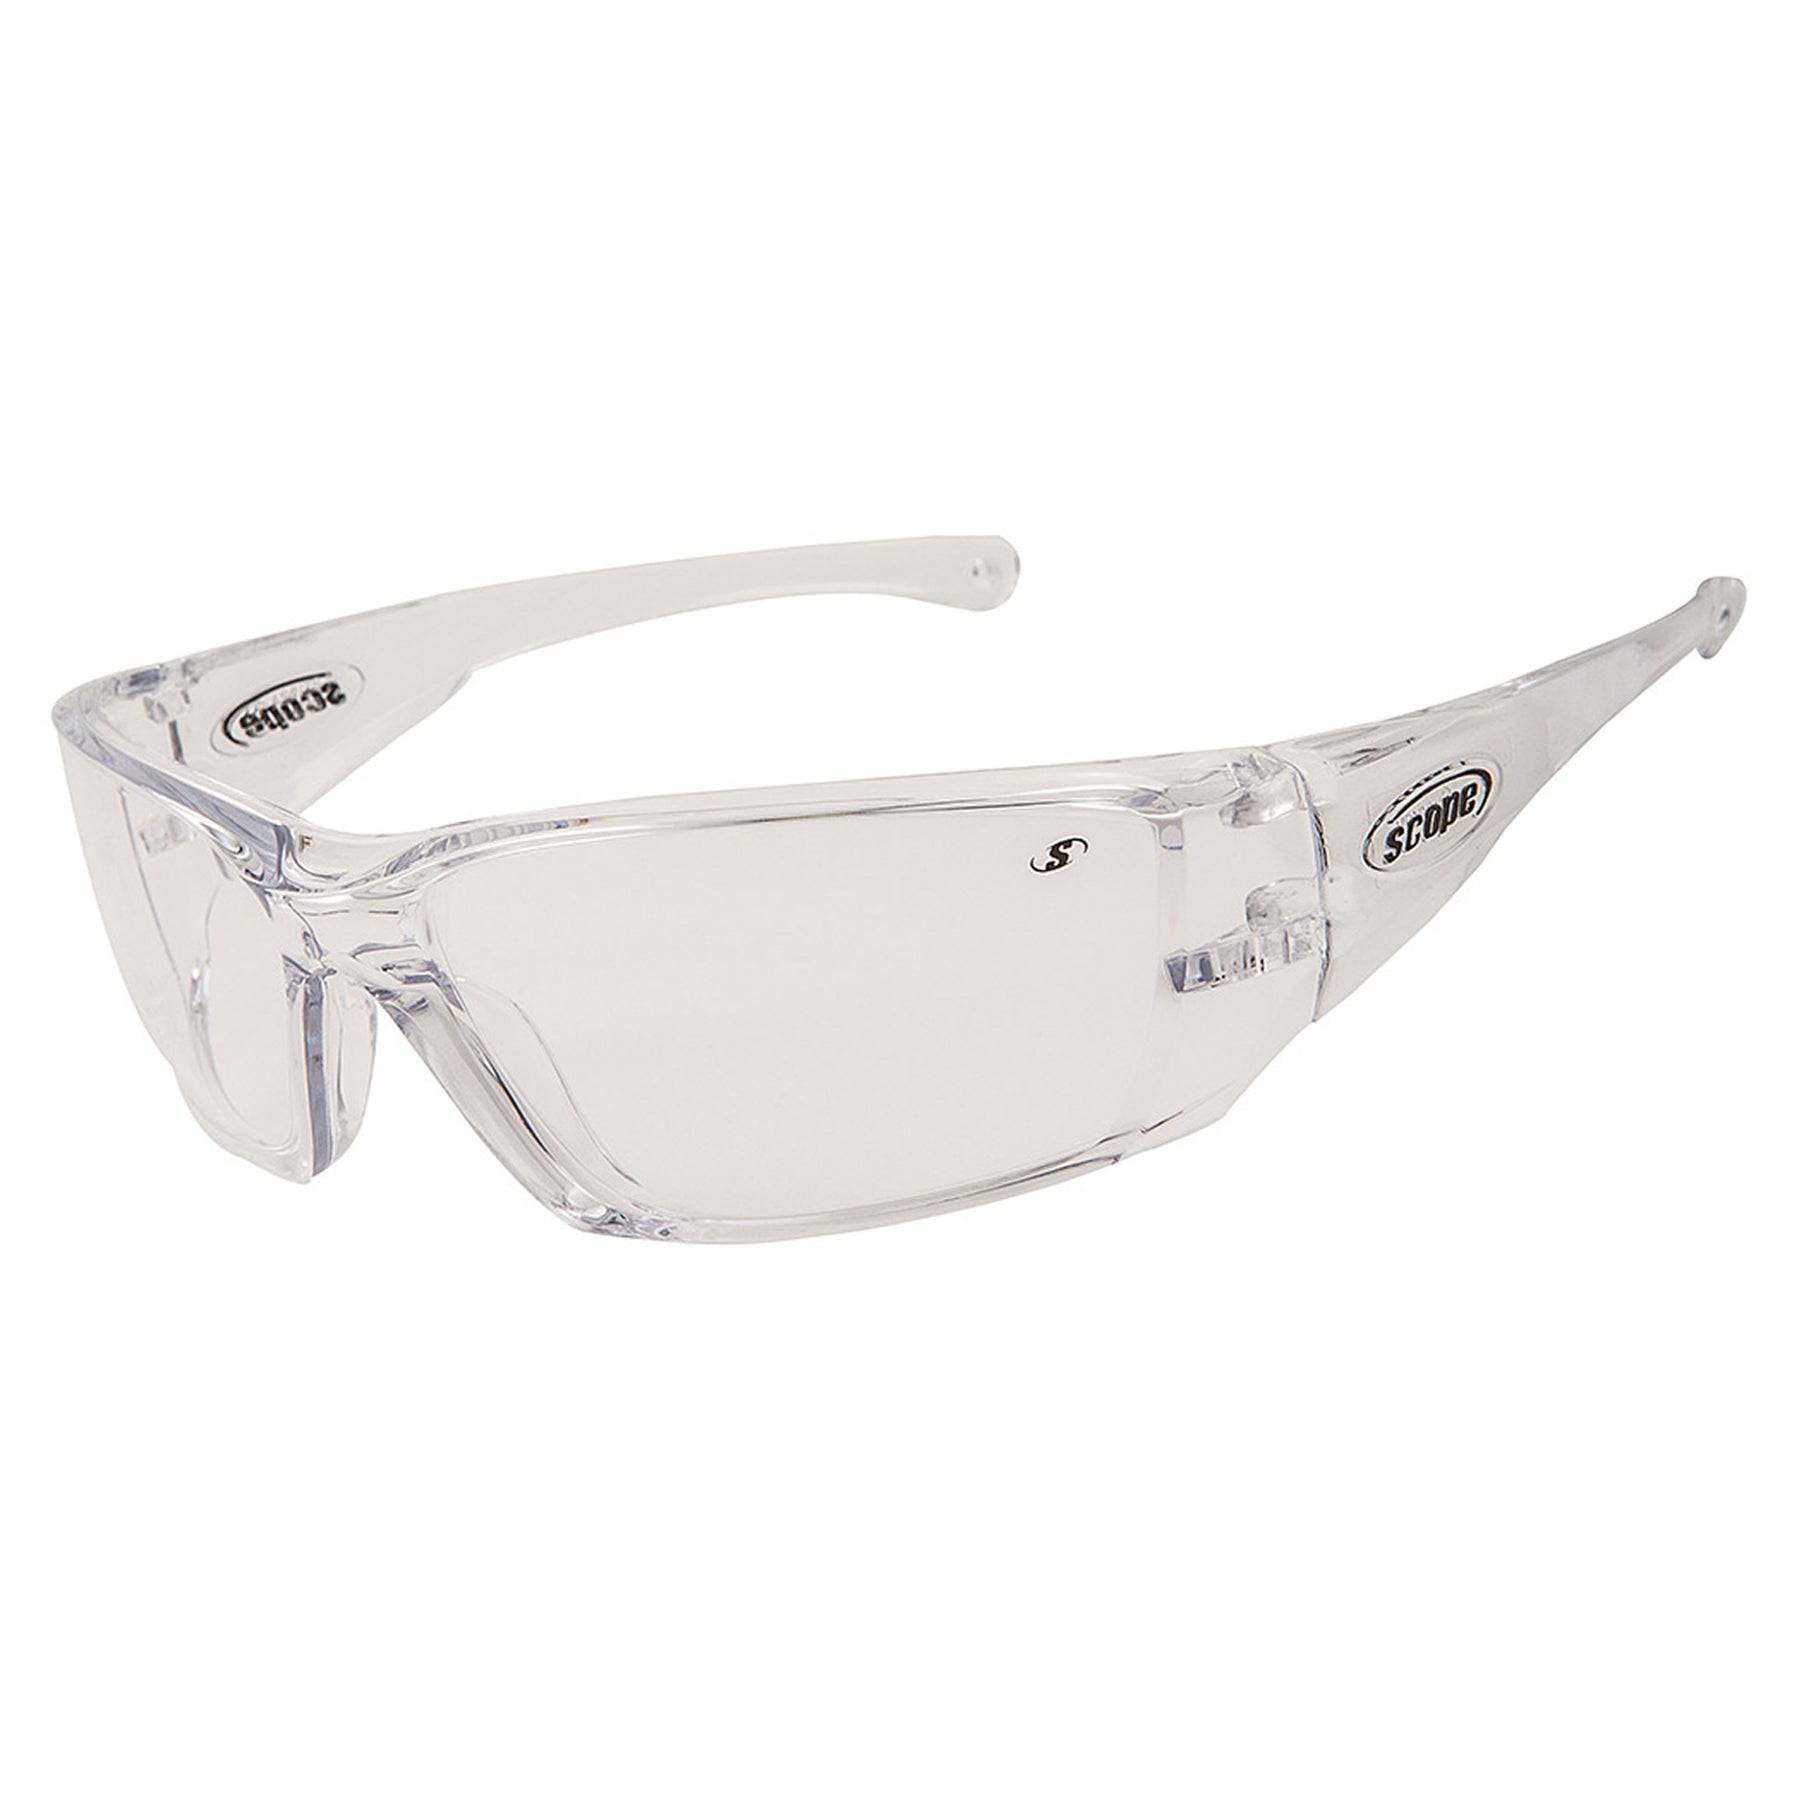 scope optics synergy safety glasses with clear lens